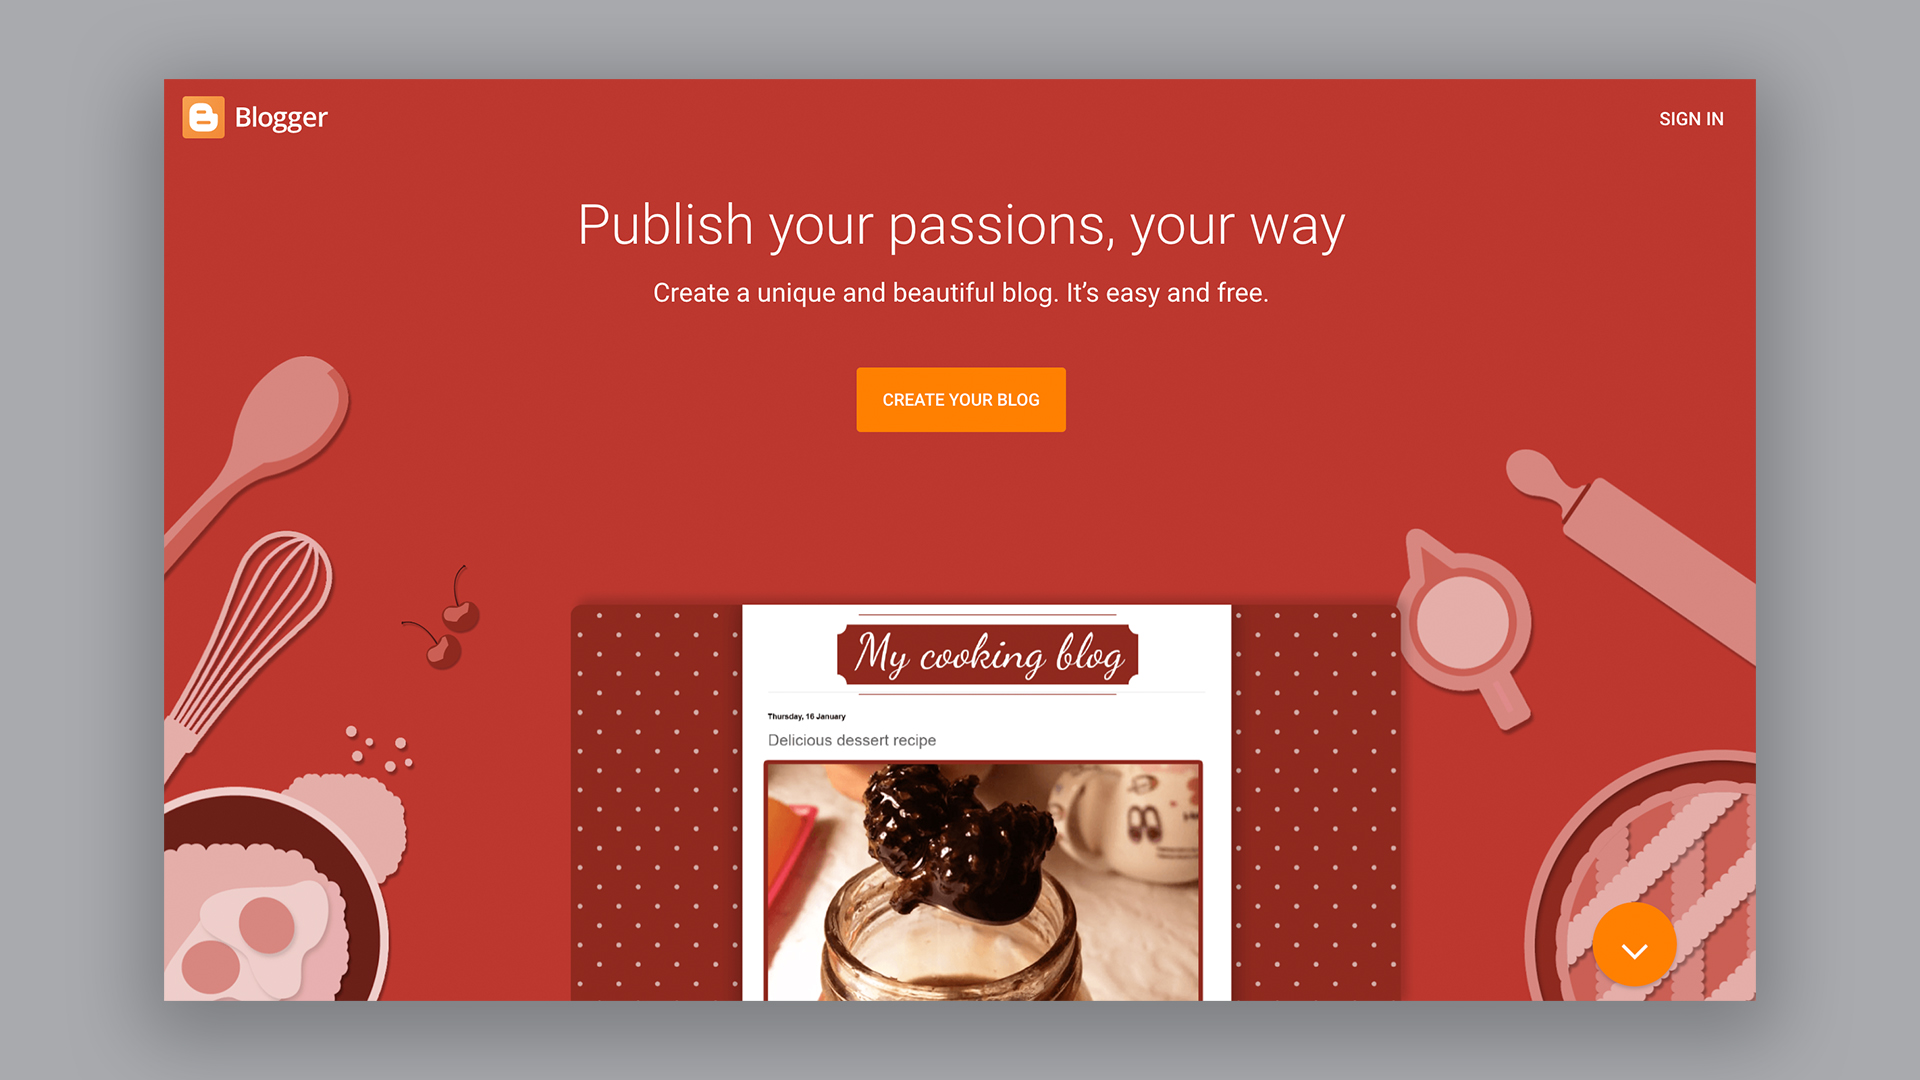 Homepage of Blogger, one of the best blogging platforms, featuring illustrations of baking ingredients